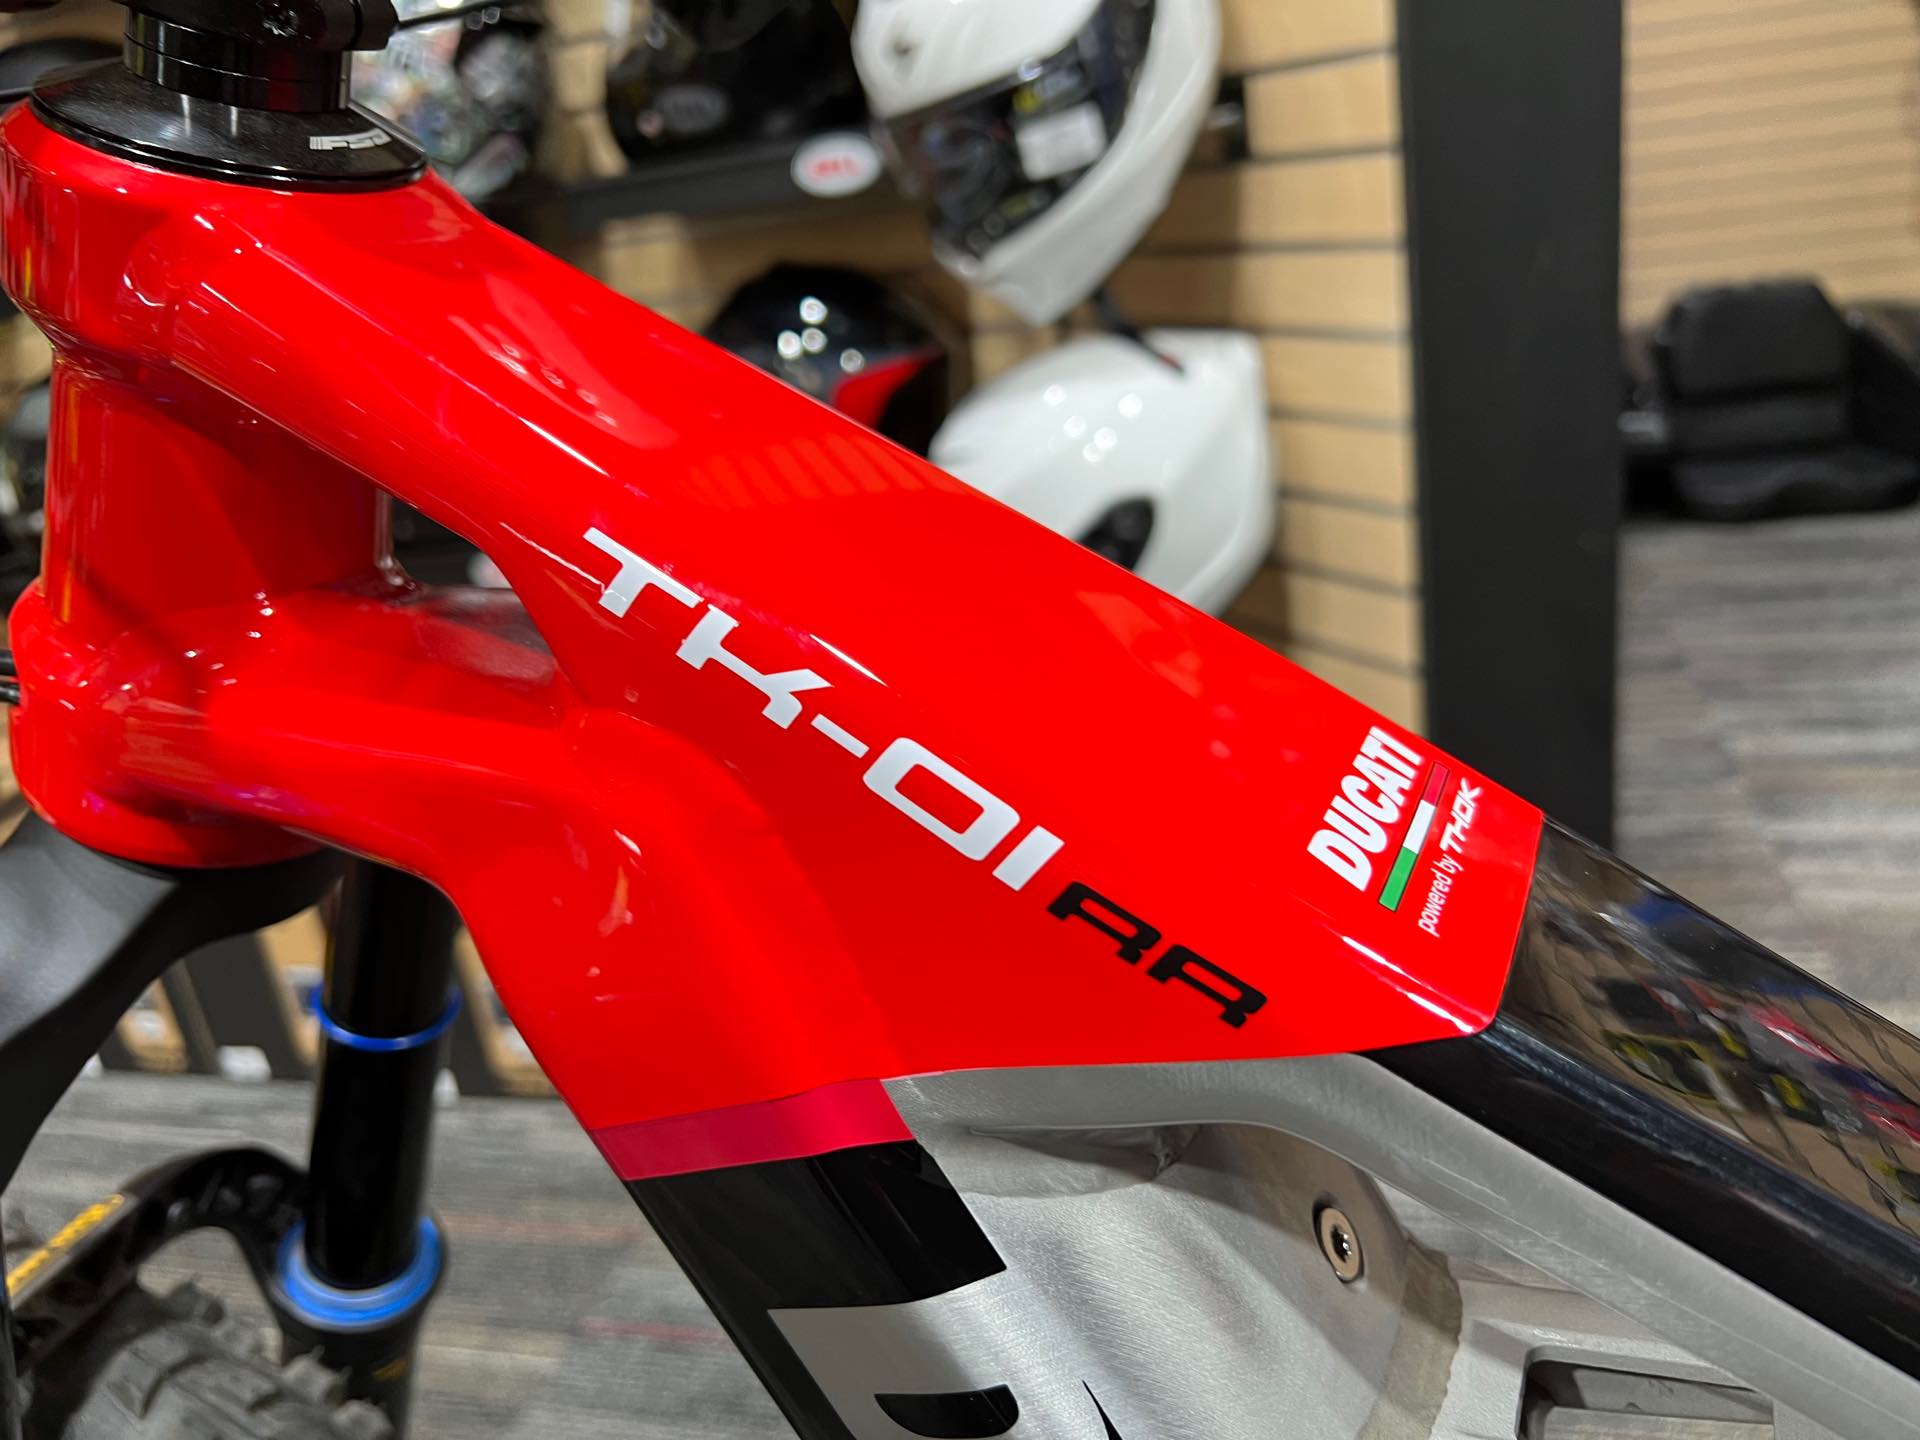 2021 DUCATI TK-01 RR (L) at Aces Motorcycles - Fort Collins